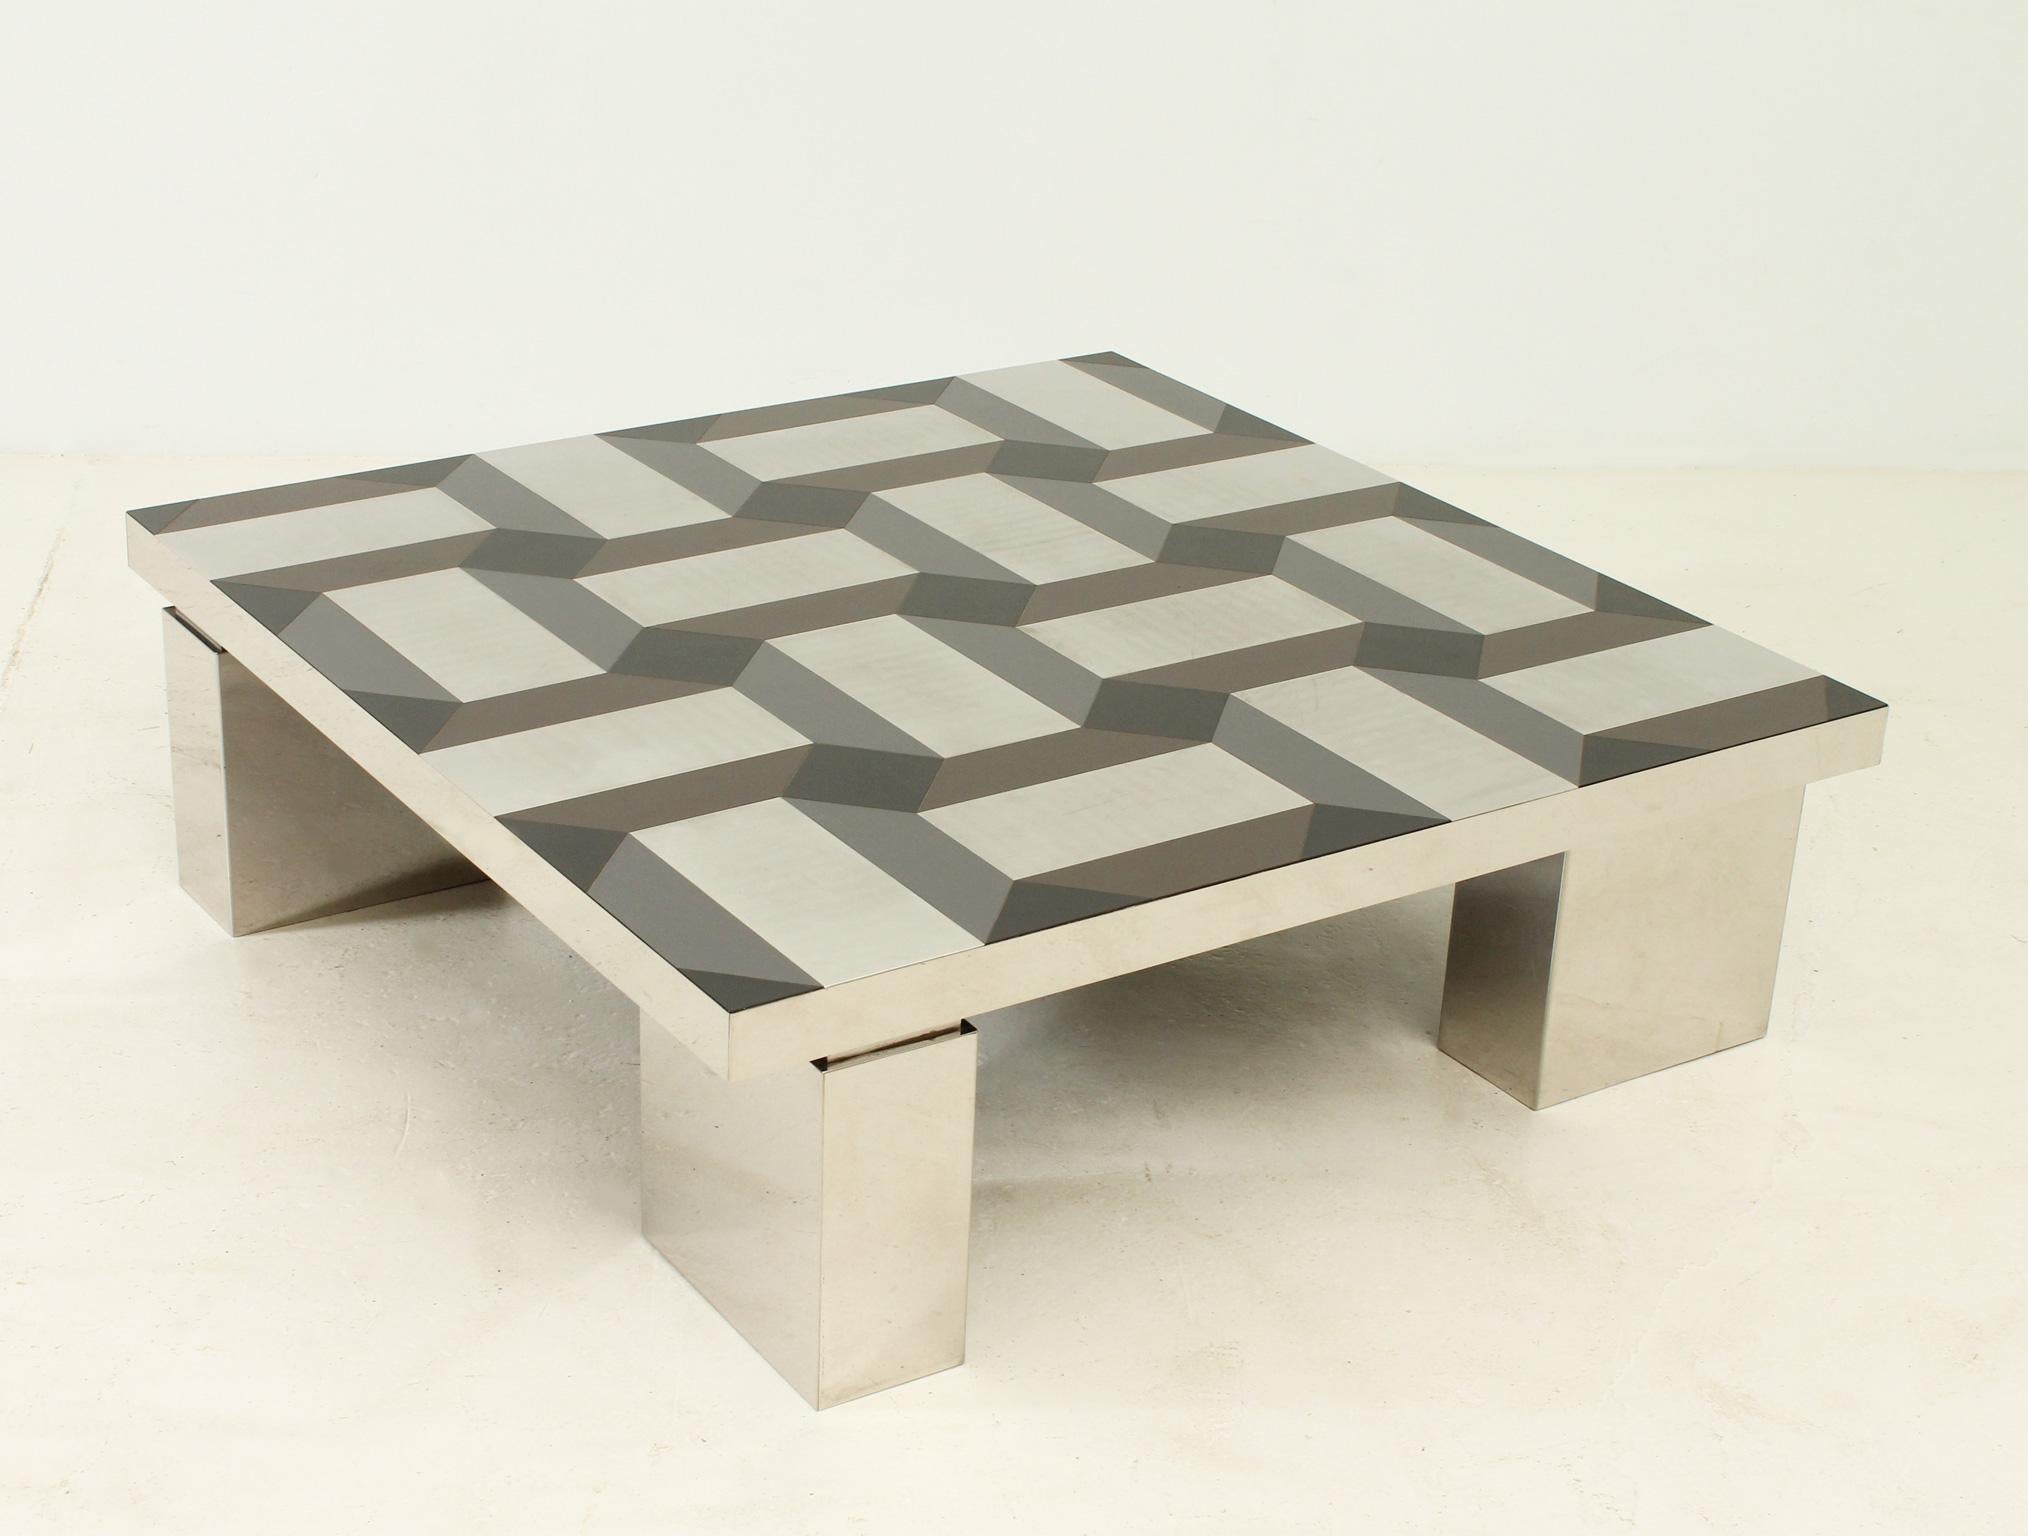 Exceptional coffee table with geometric pattern top, Italy 1970's. Chromed steel structure and top made of cut pieces of color laminate and steel forming a geometric pattern.